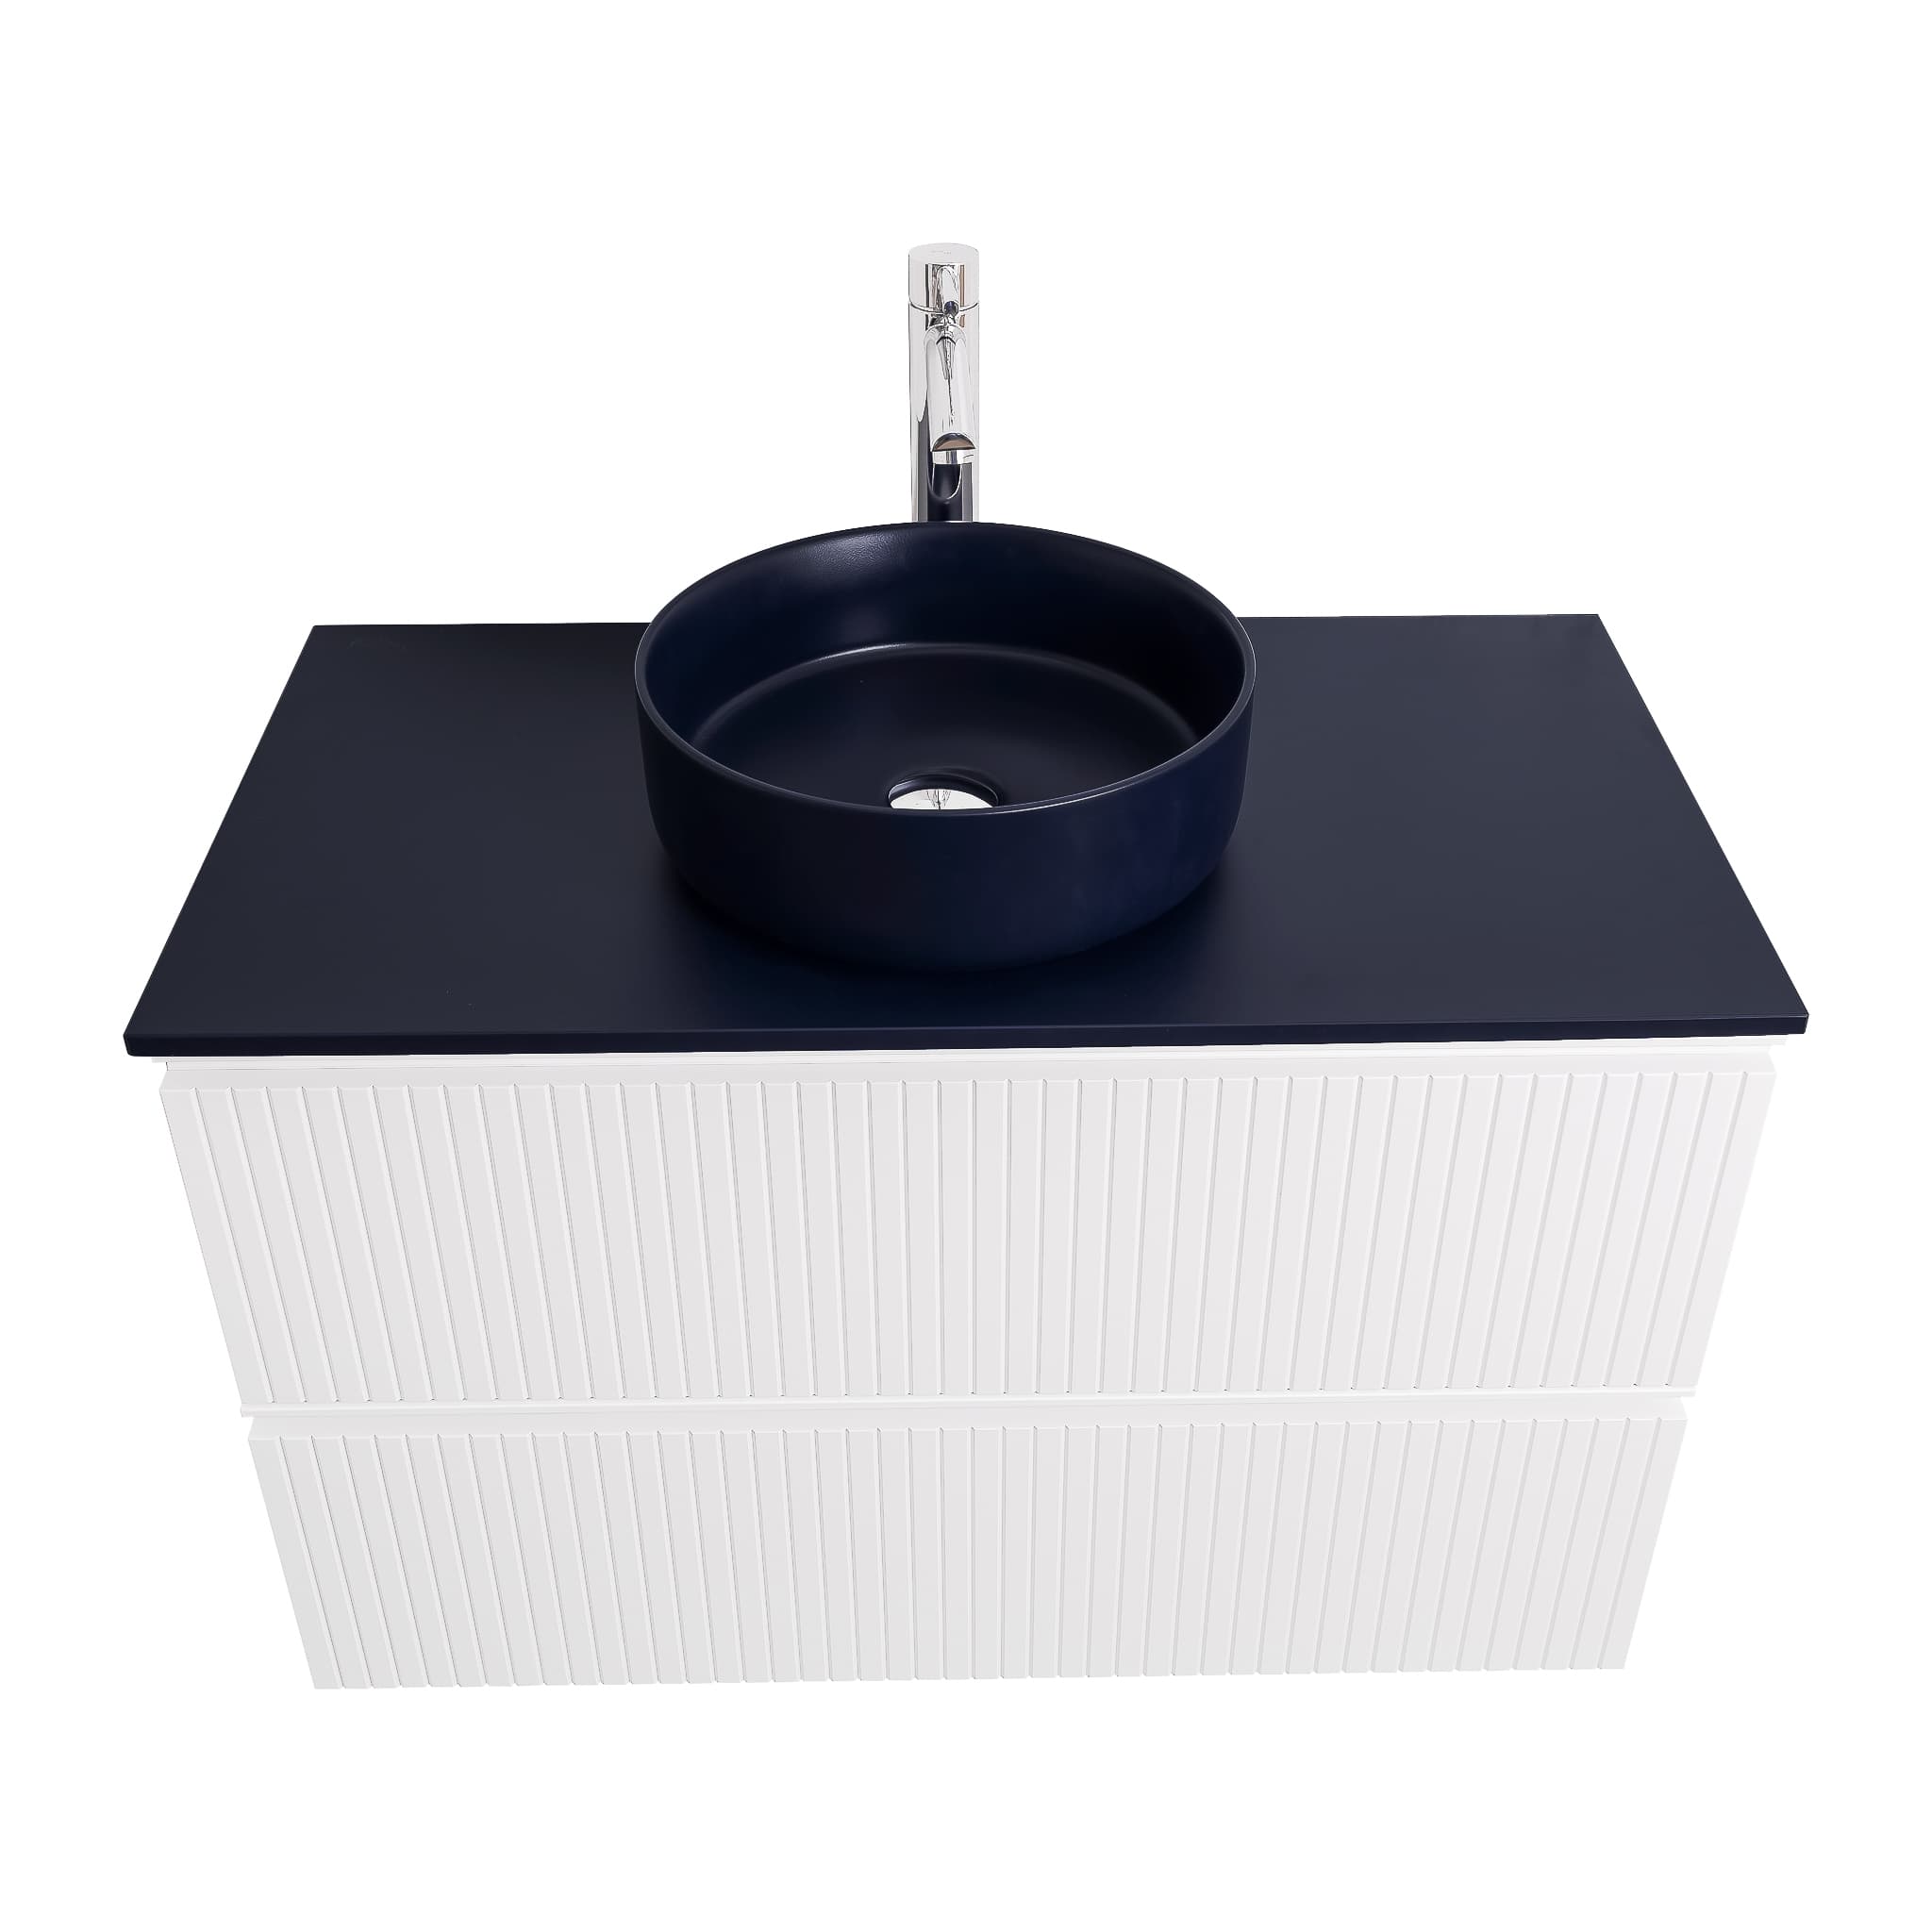 Ares 39.5 Matte White Cabinet, Ares Navy Blue Top And Ares Navy Blue Ceramic Basin, Wall Mounted Modern Vanity Set